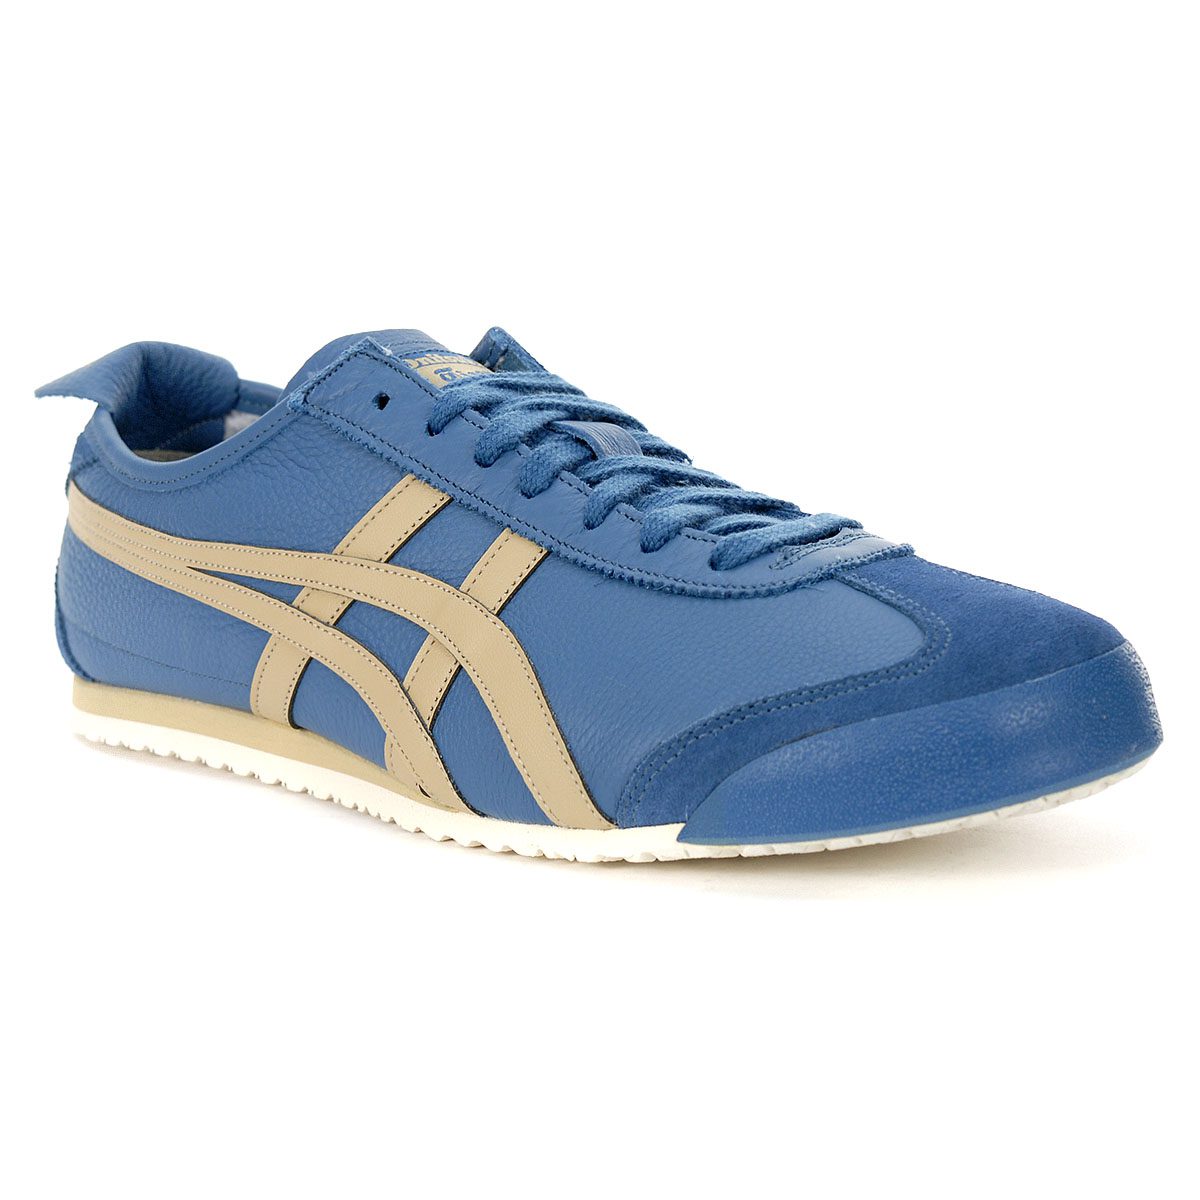 ASICS Onitsuka Tiger Mexico 66 Winter Sea/Wood Crepe Unisex Sneakers ...